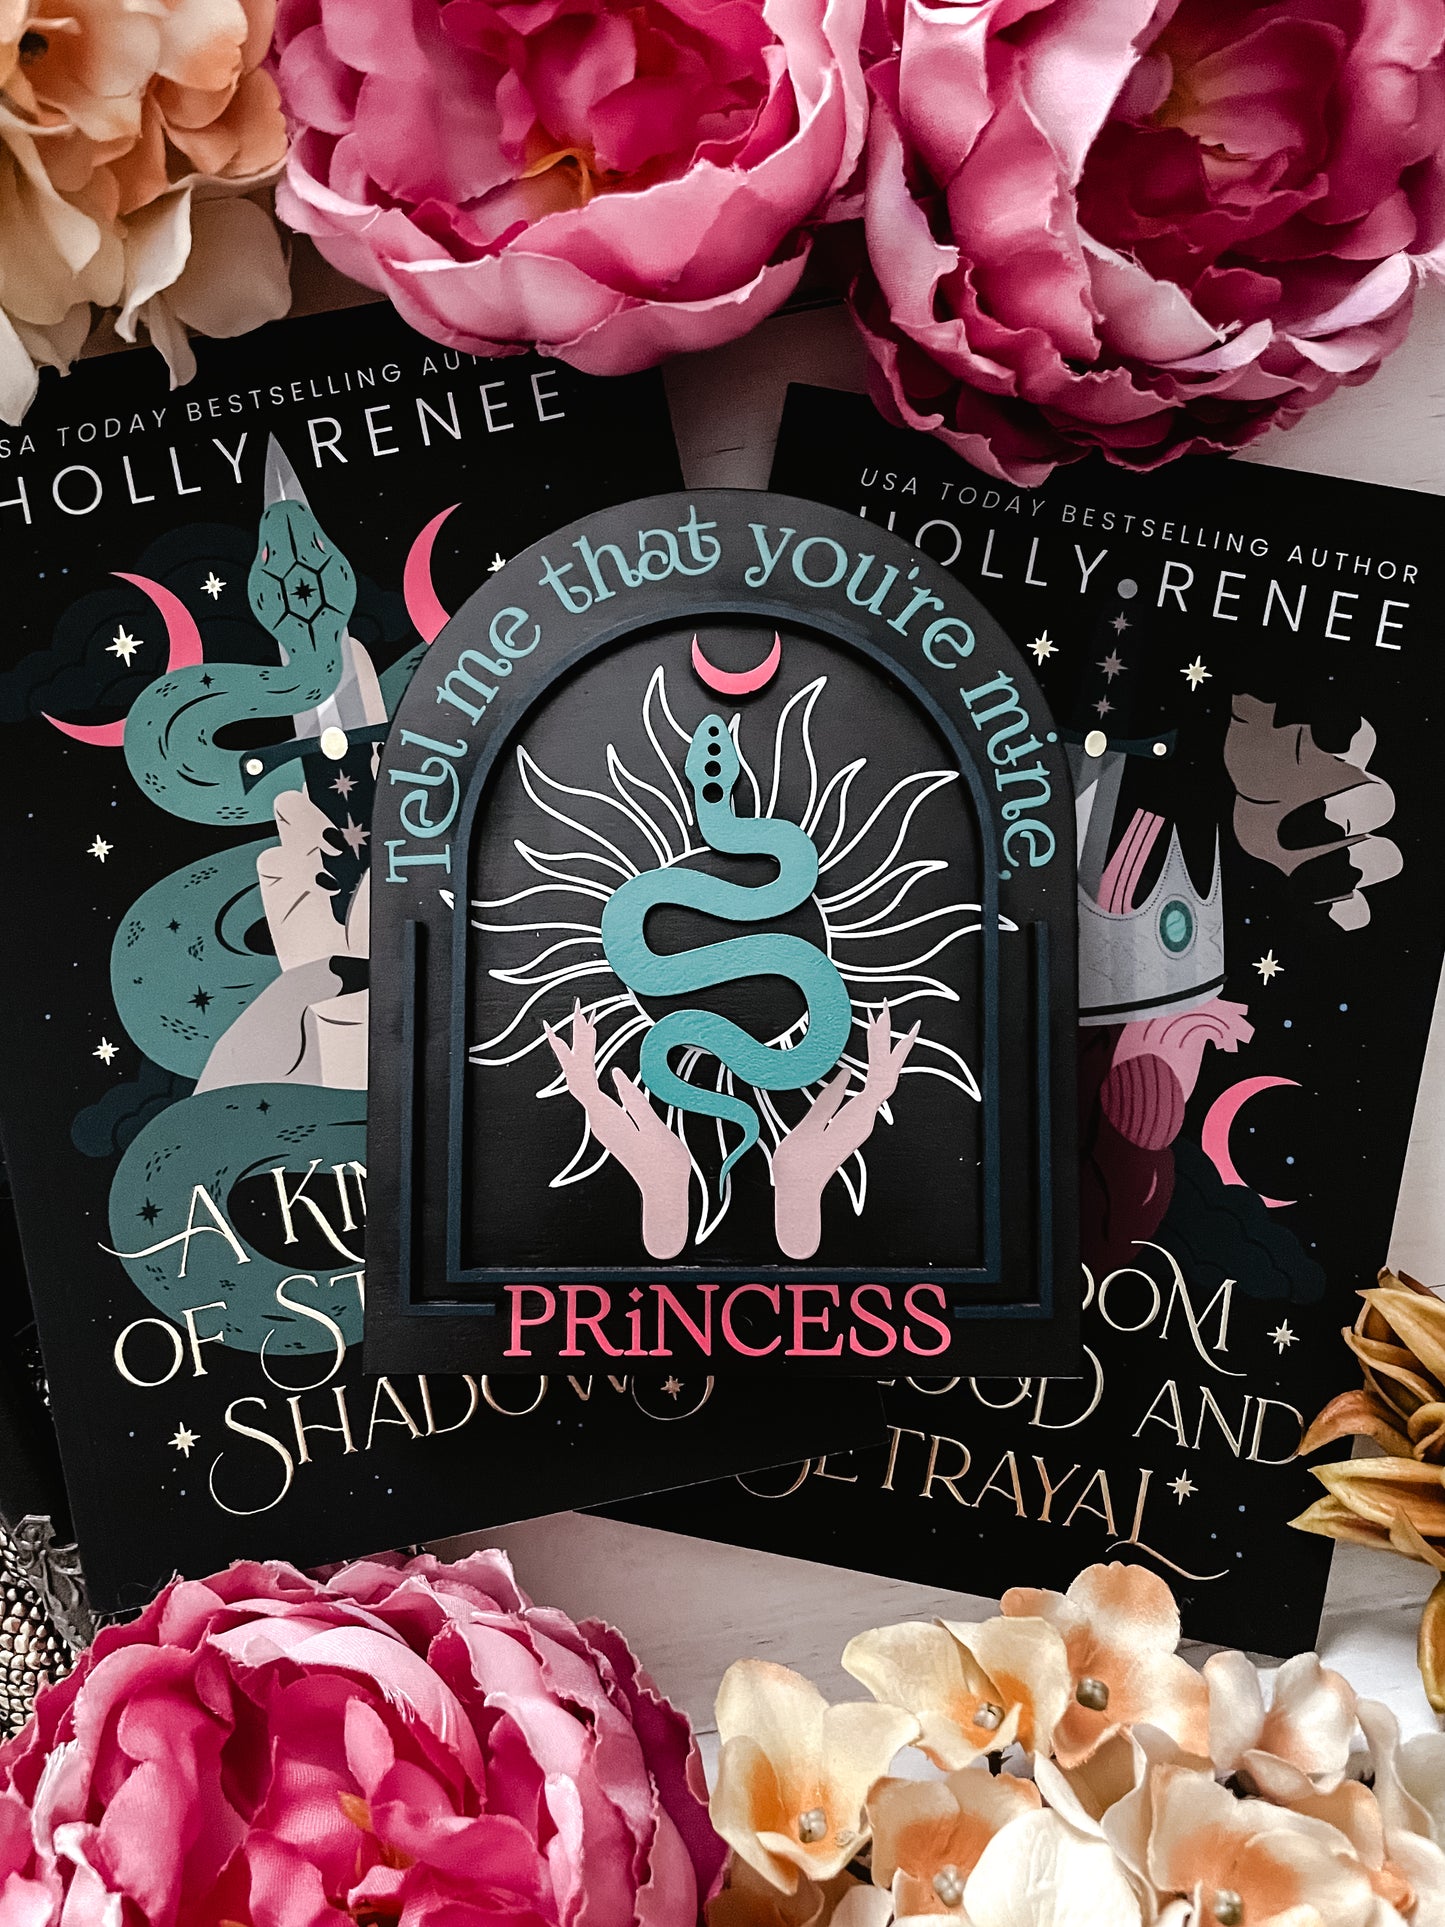 "Princess" Shelf Sign - Officially Licensed Holly Renee Collection